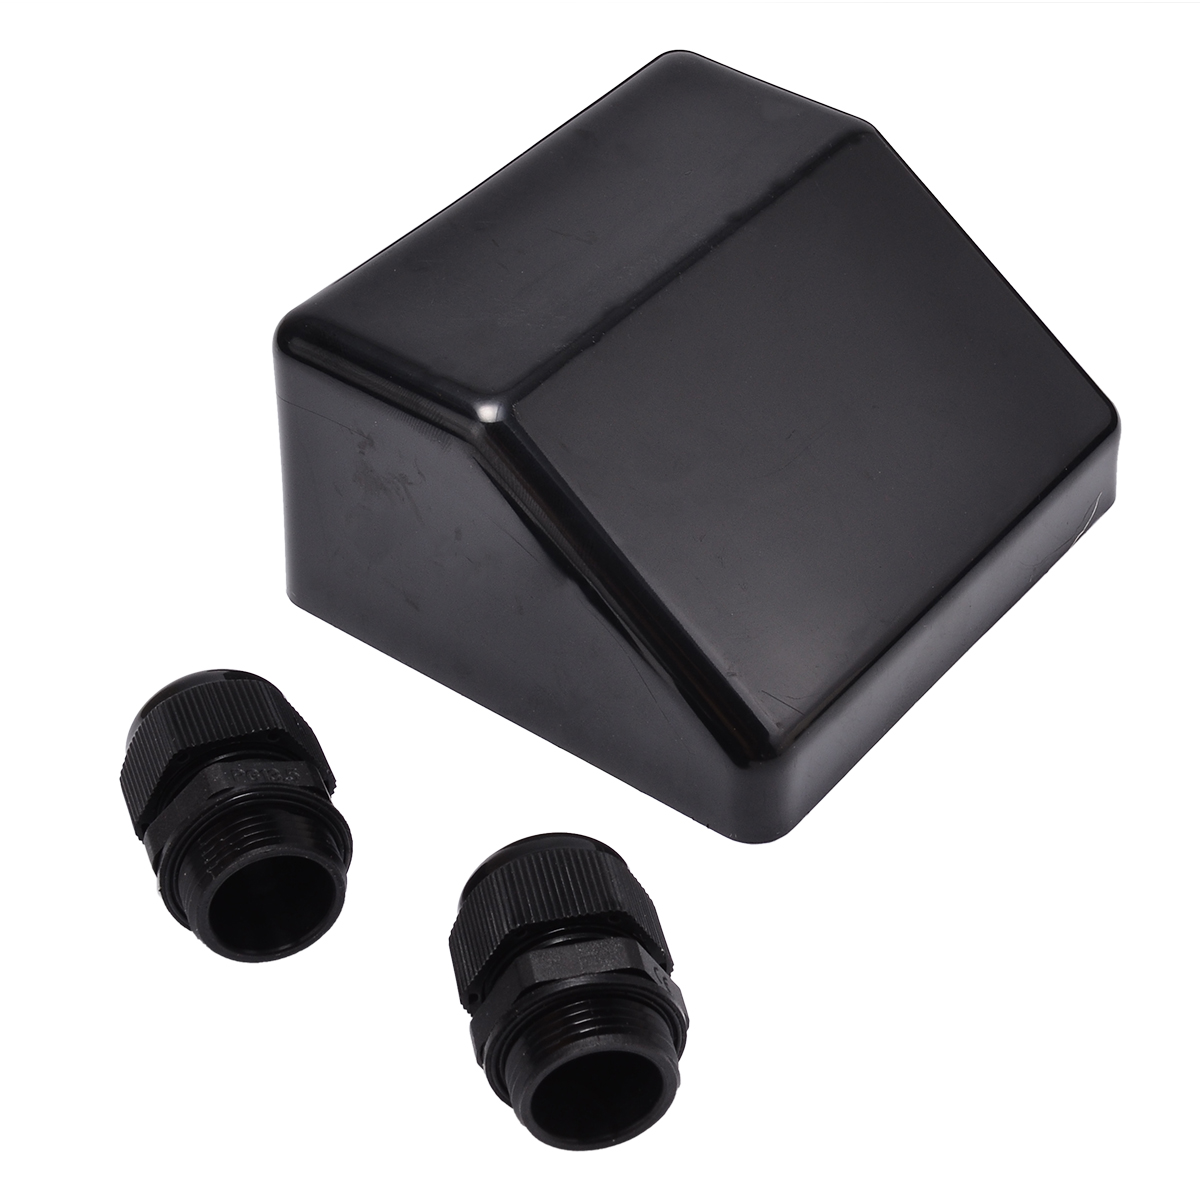 Mayitr Black Roof Cable Entry Gland Protection Box Solar Panel Double Cable Gland For Caravan Boat Waterproof Supplies